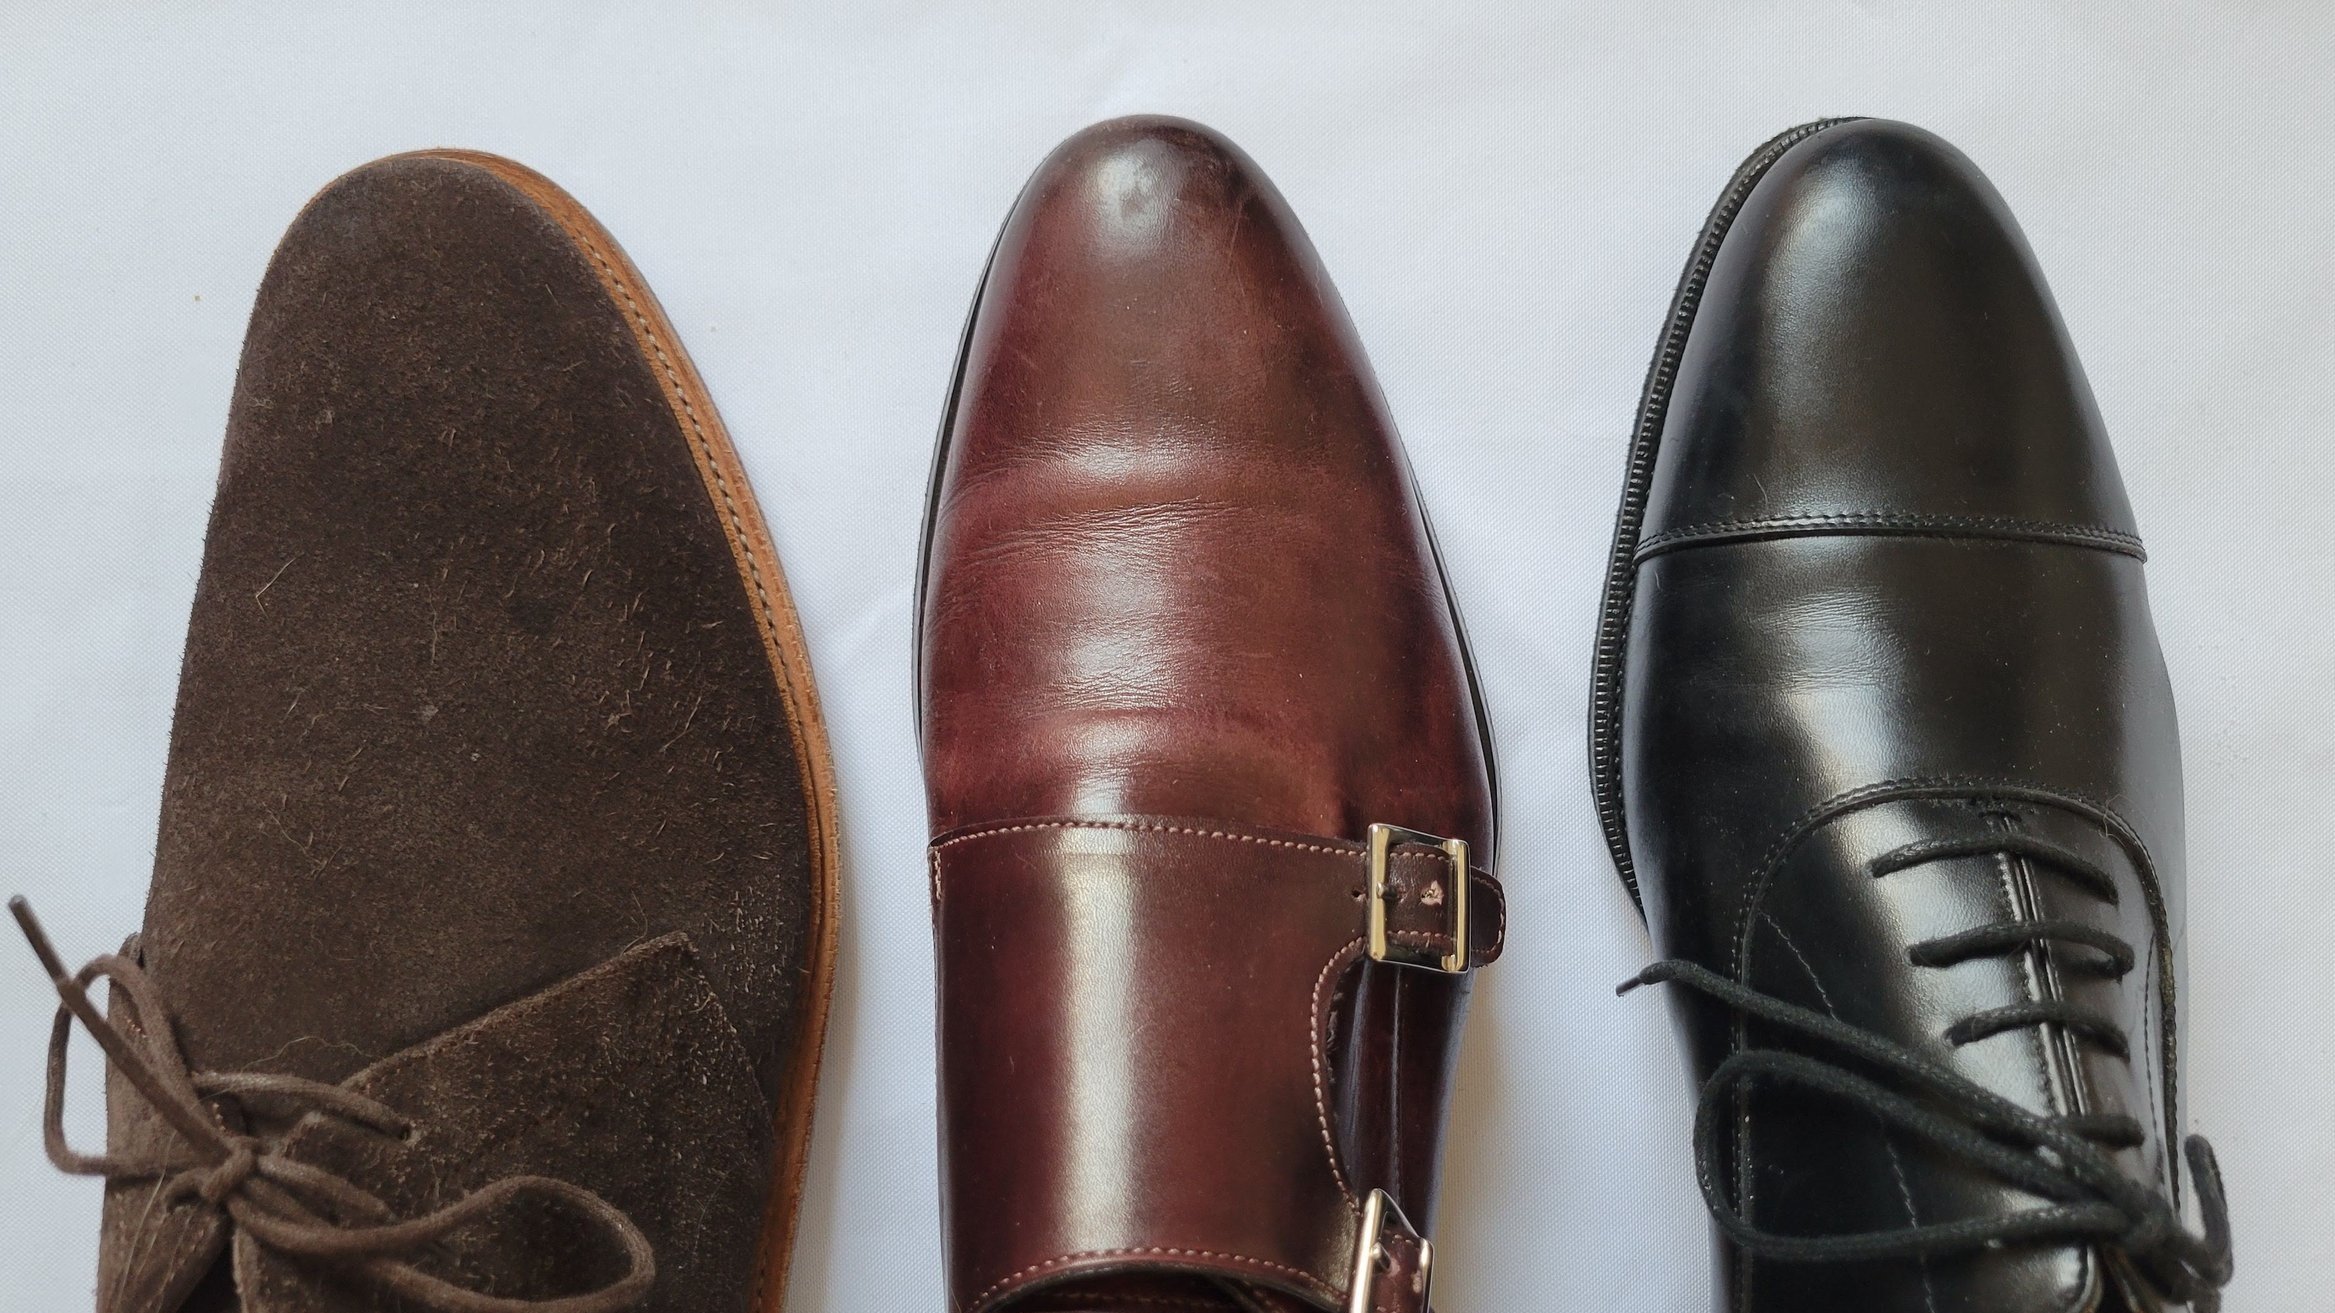 Trade in Your Old R.M. Williams Boots for $150